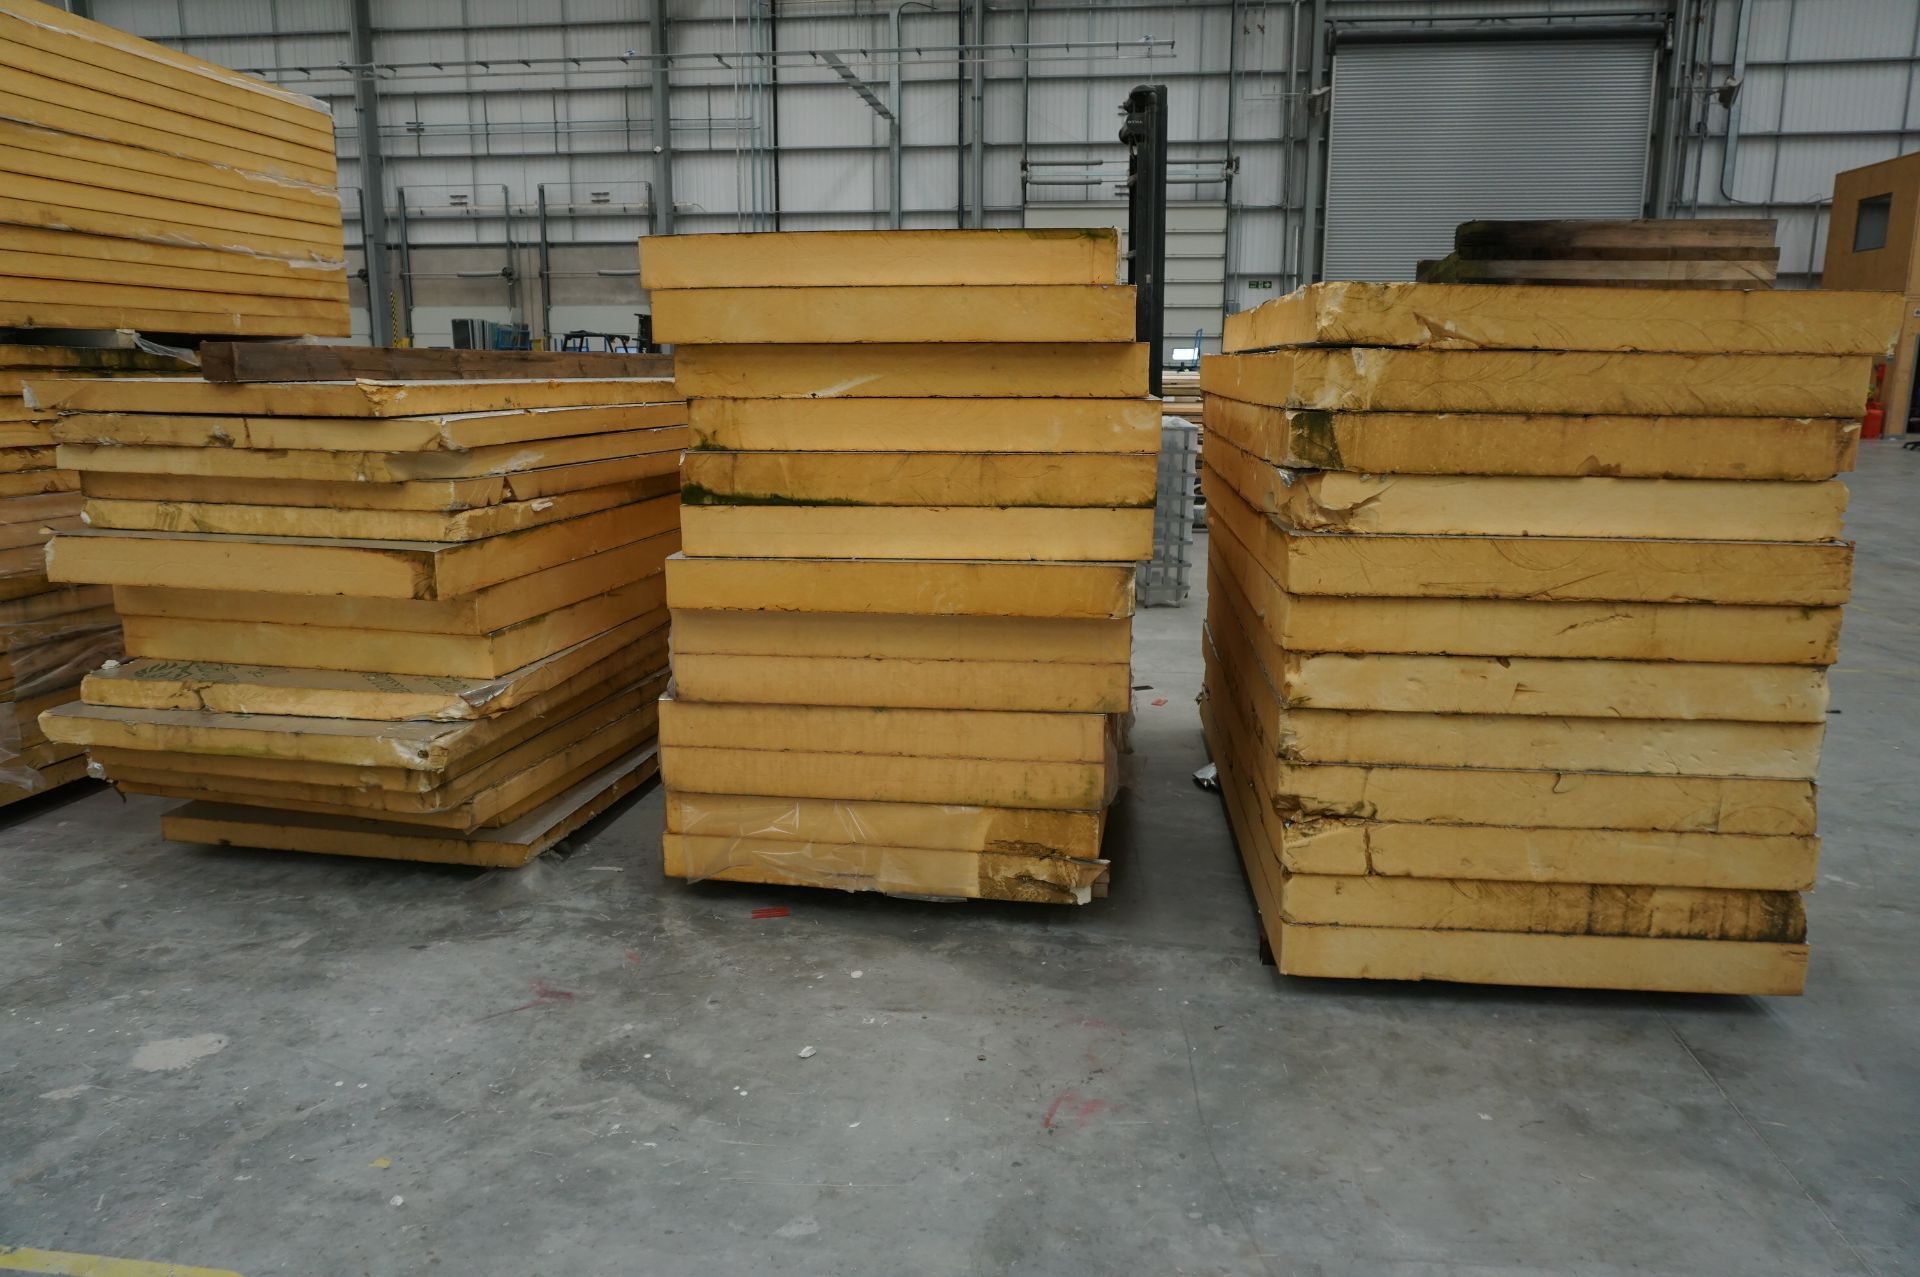 39x (no.) Kingspan, Therma TP10 insulation board, 3 mixed pallets, thickness 80 to 130mm, 1200 x - Image 4 of 5